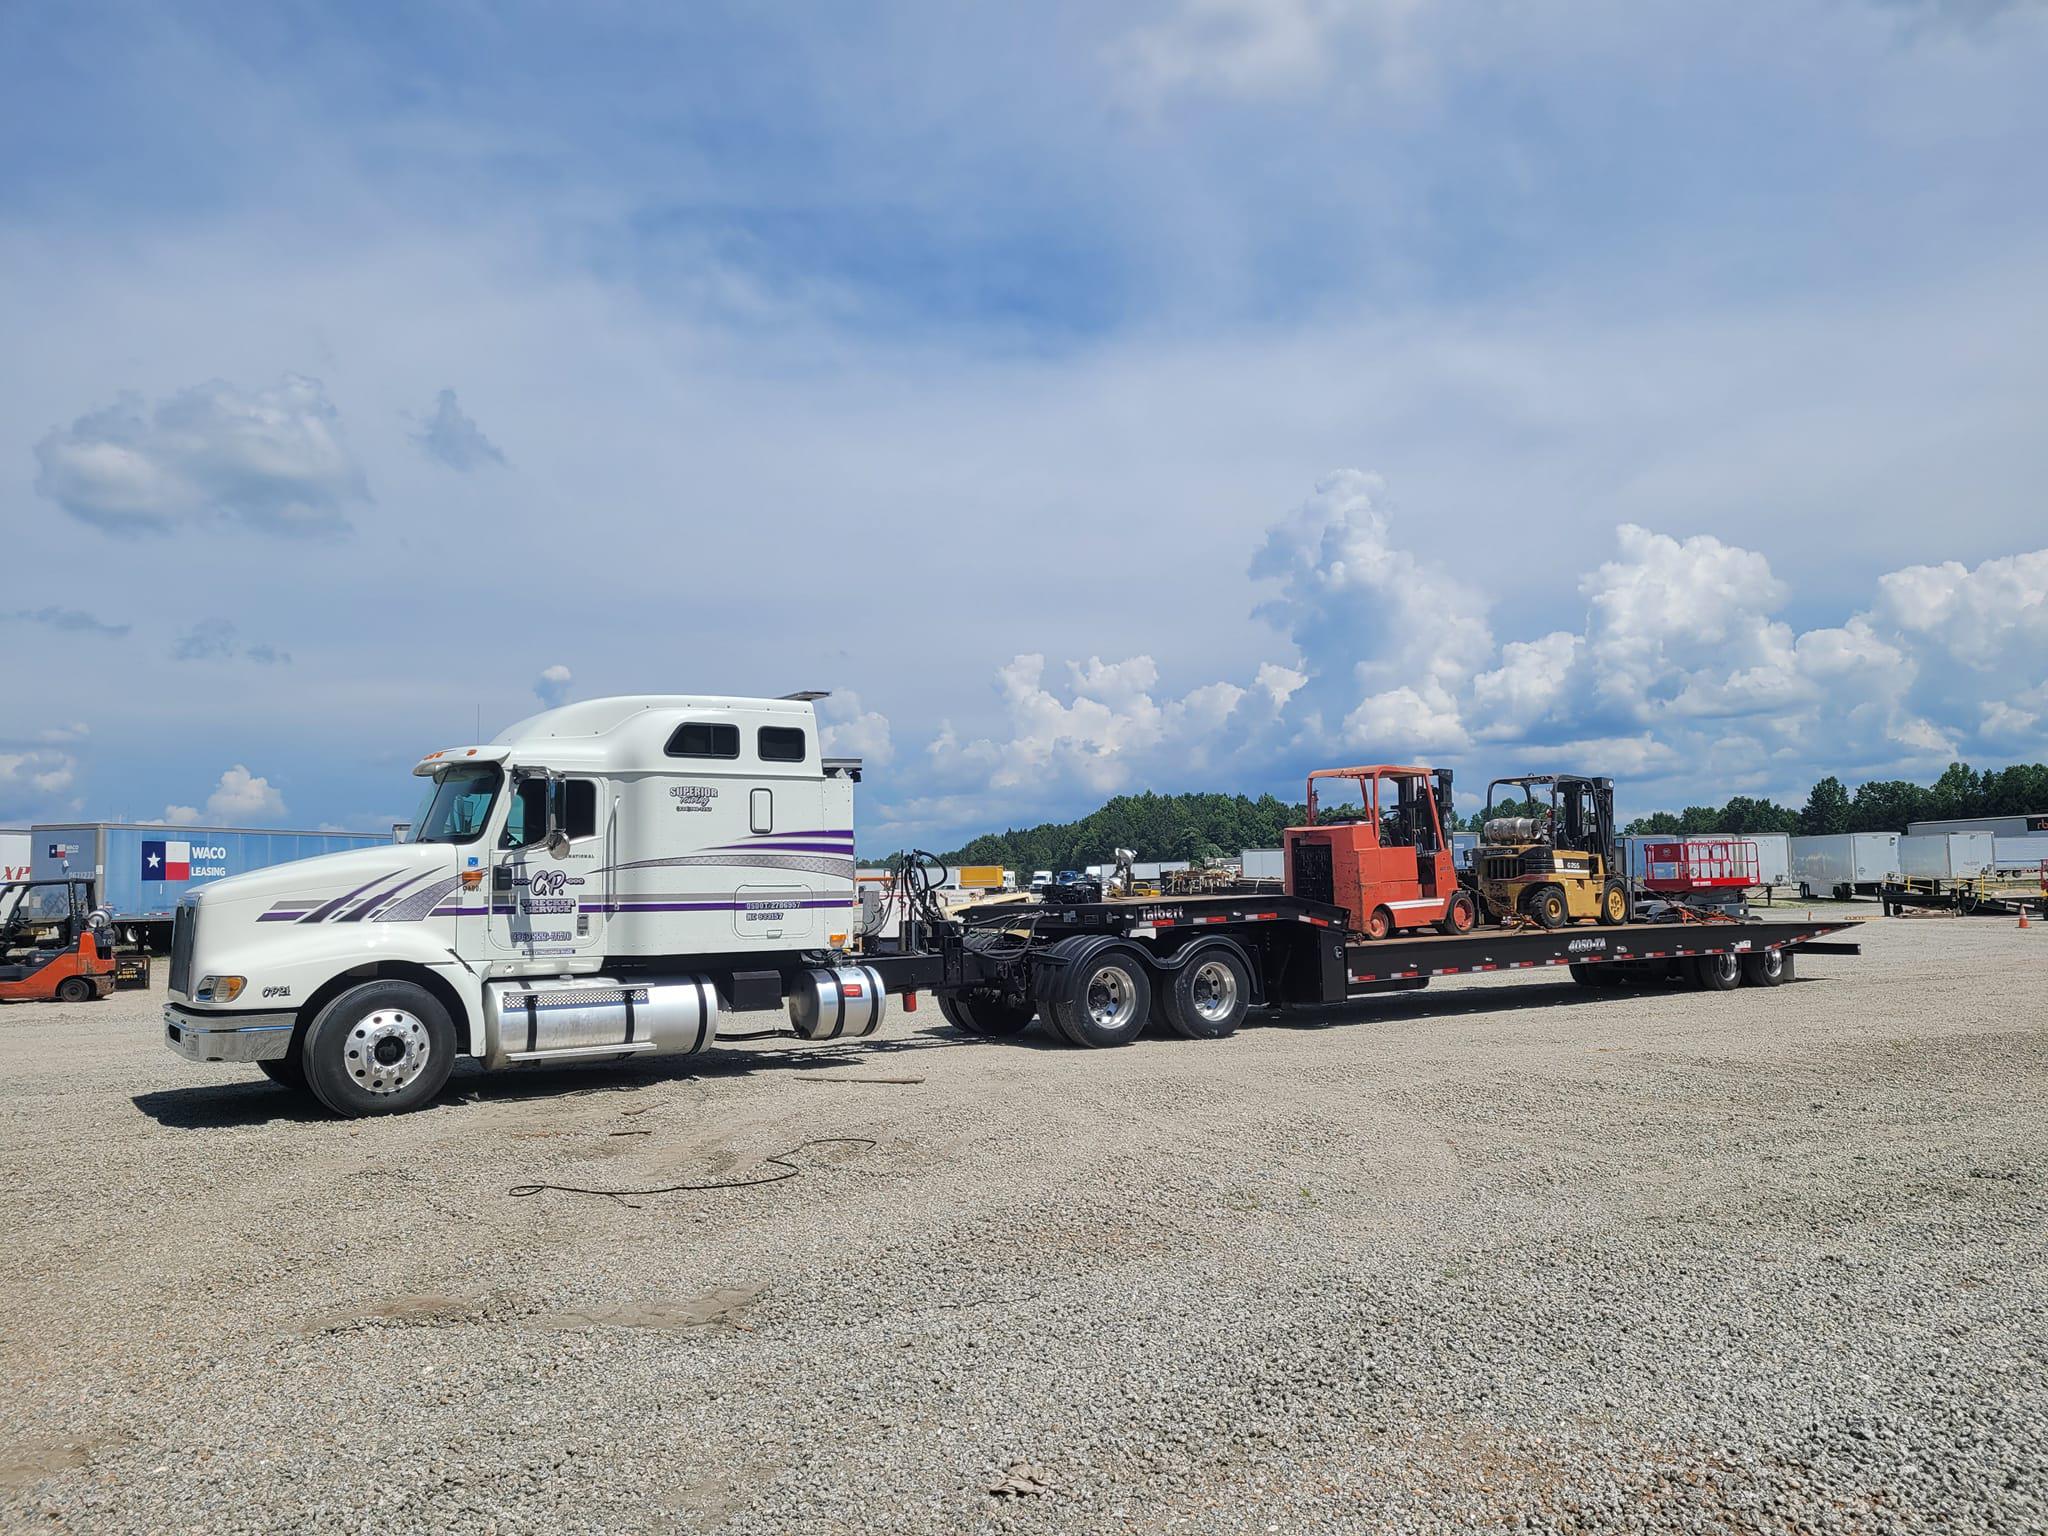 Don't get stuck without a tow truck! Call today!